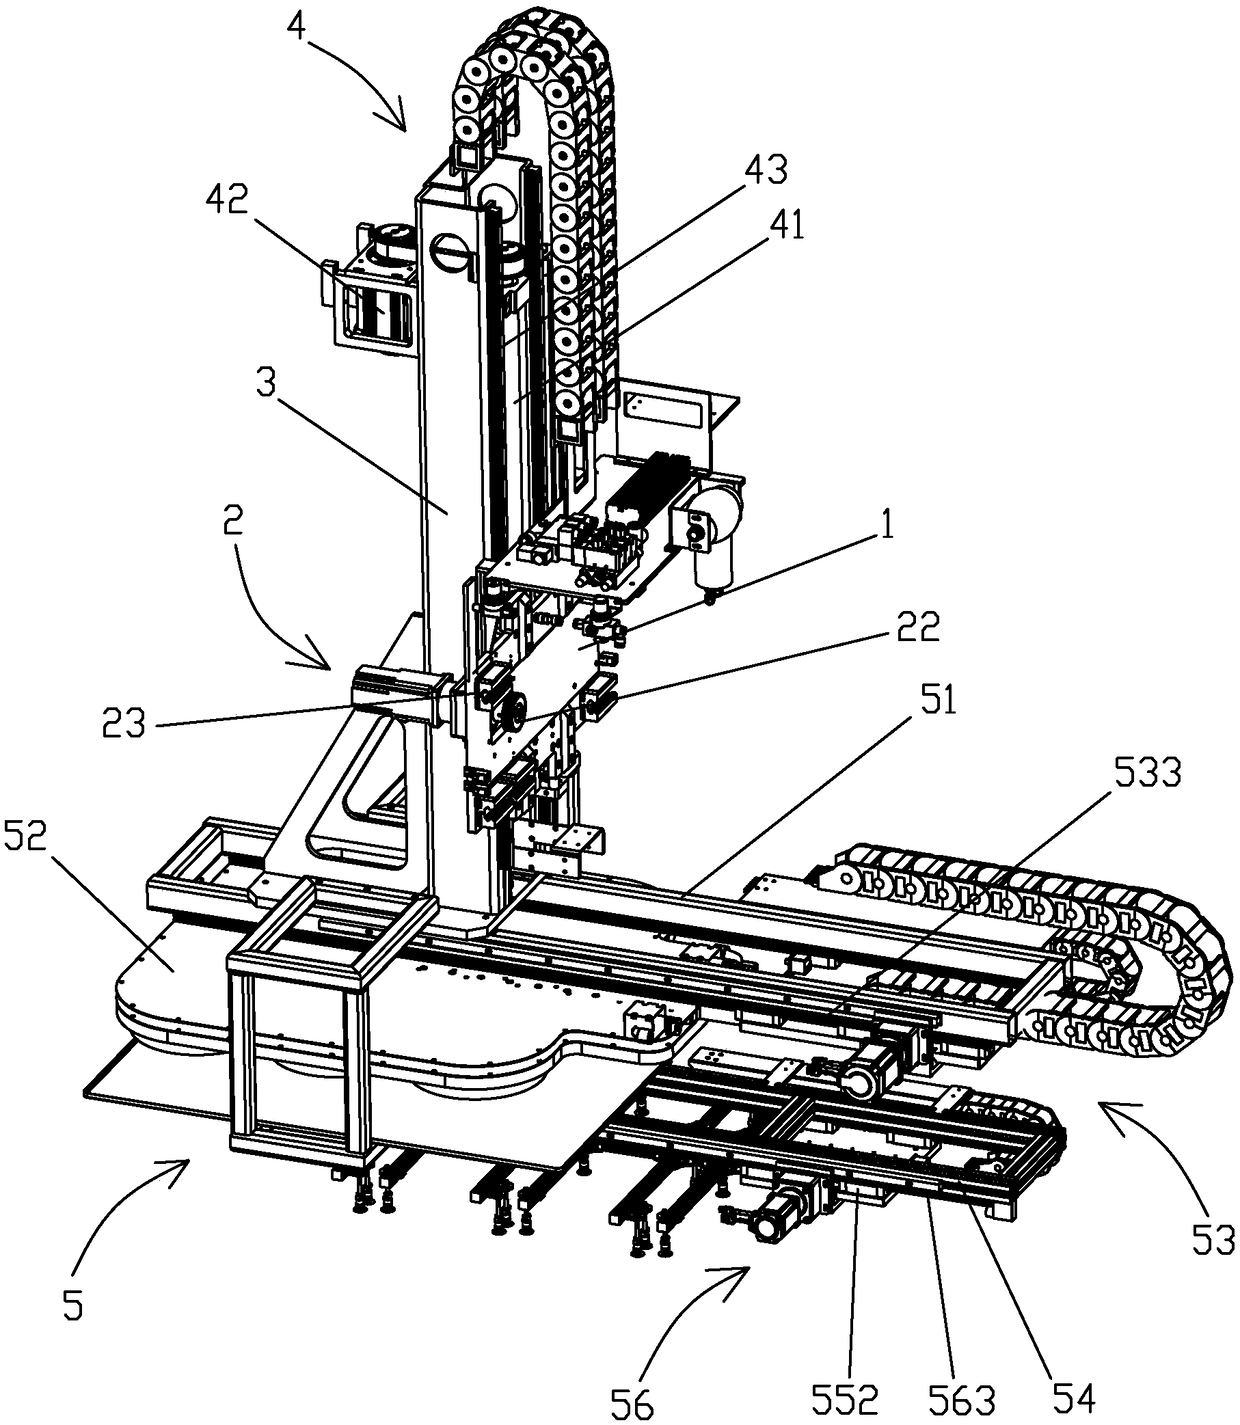 Paper matrix loading and unloading material manipulator with stable pick-and-place part mechanism